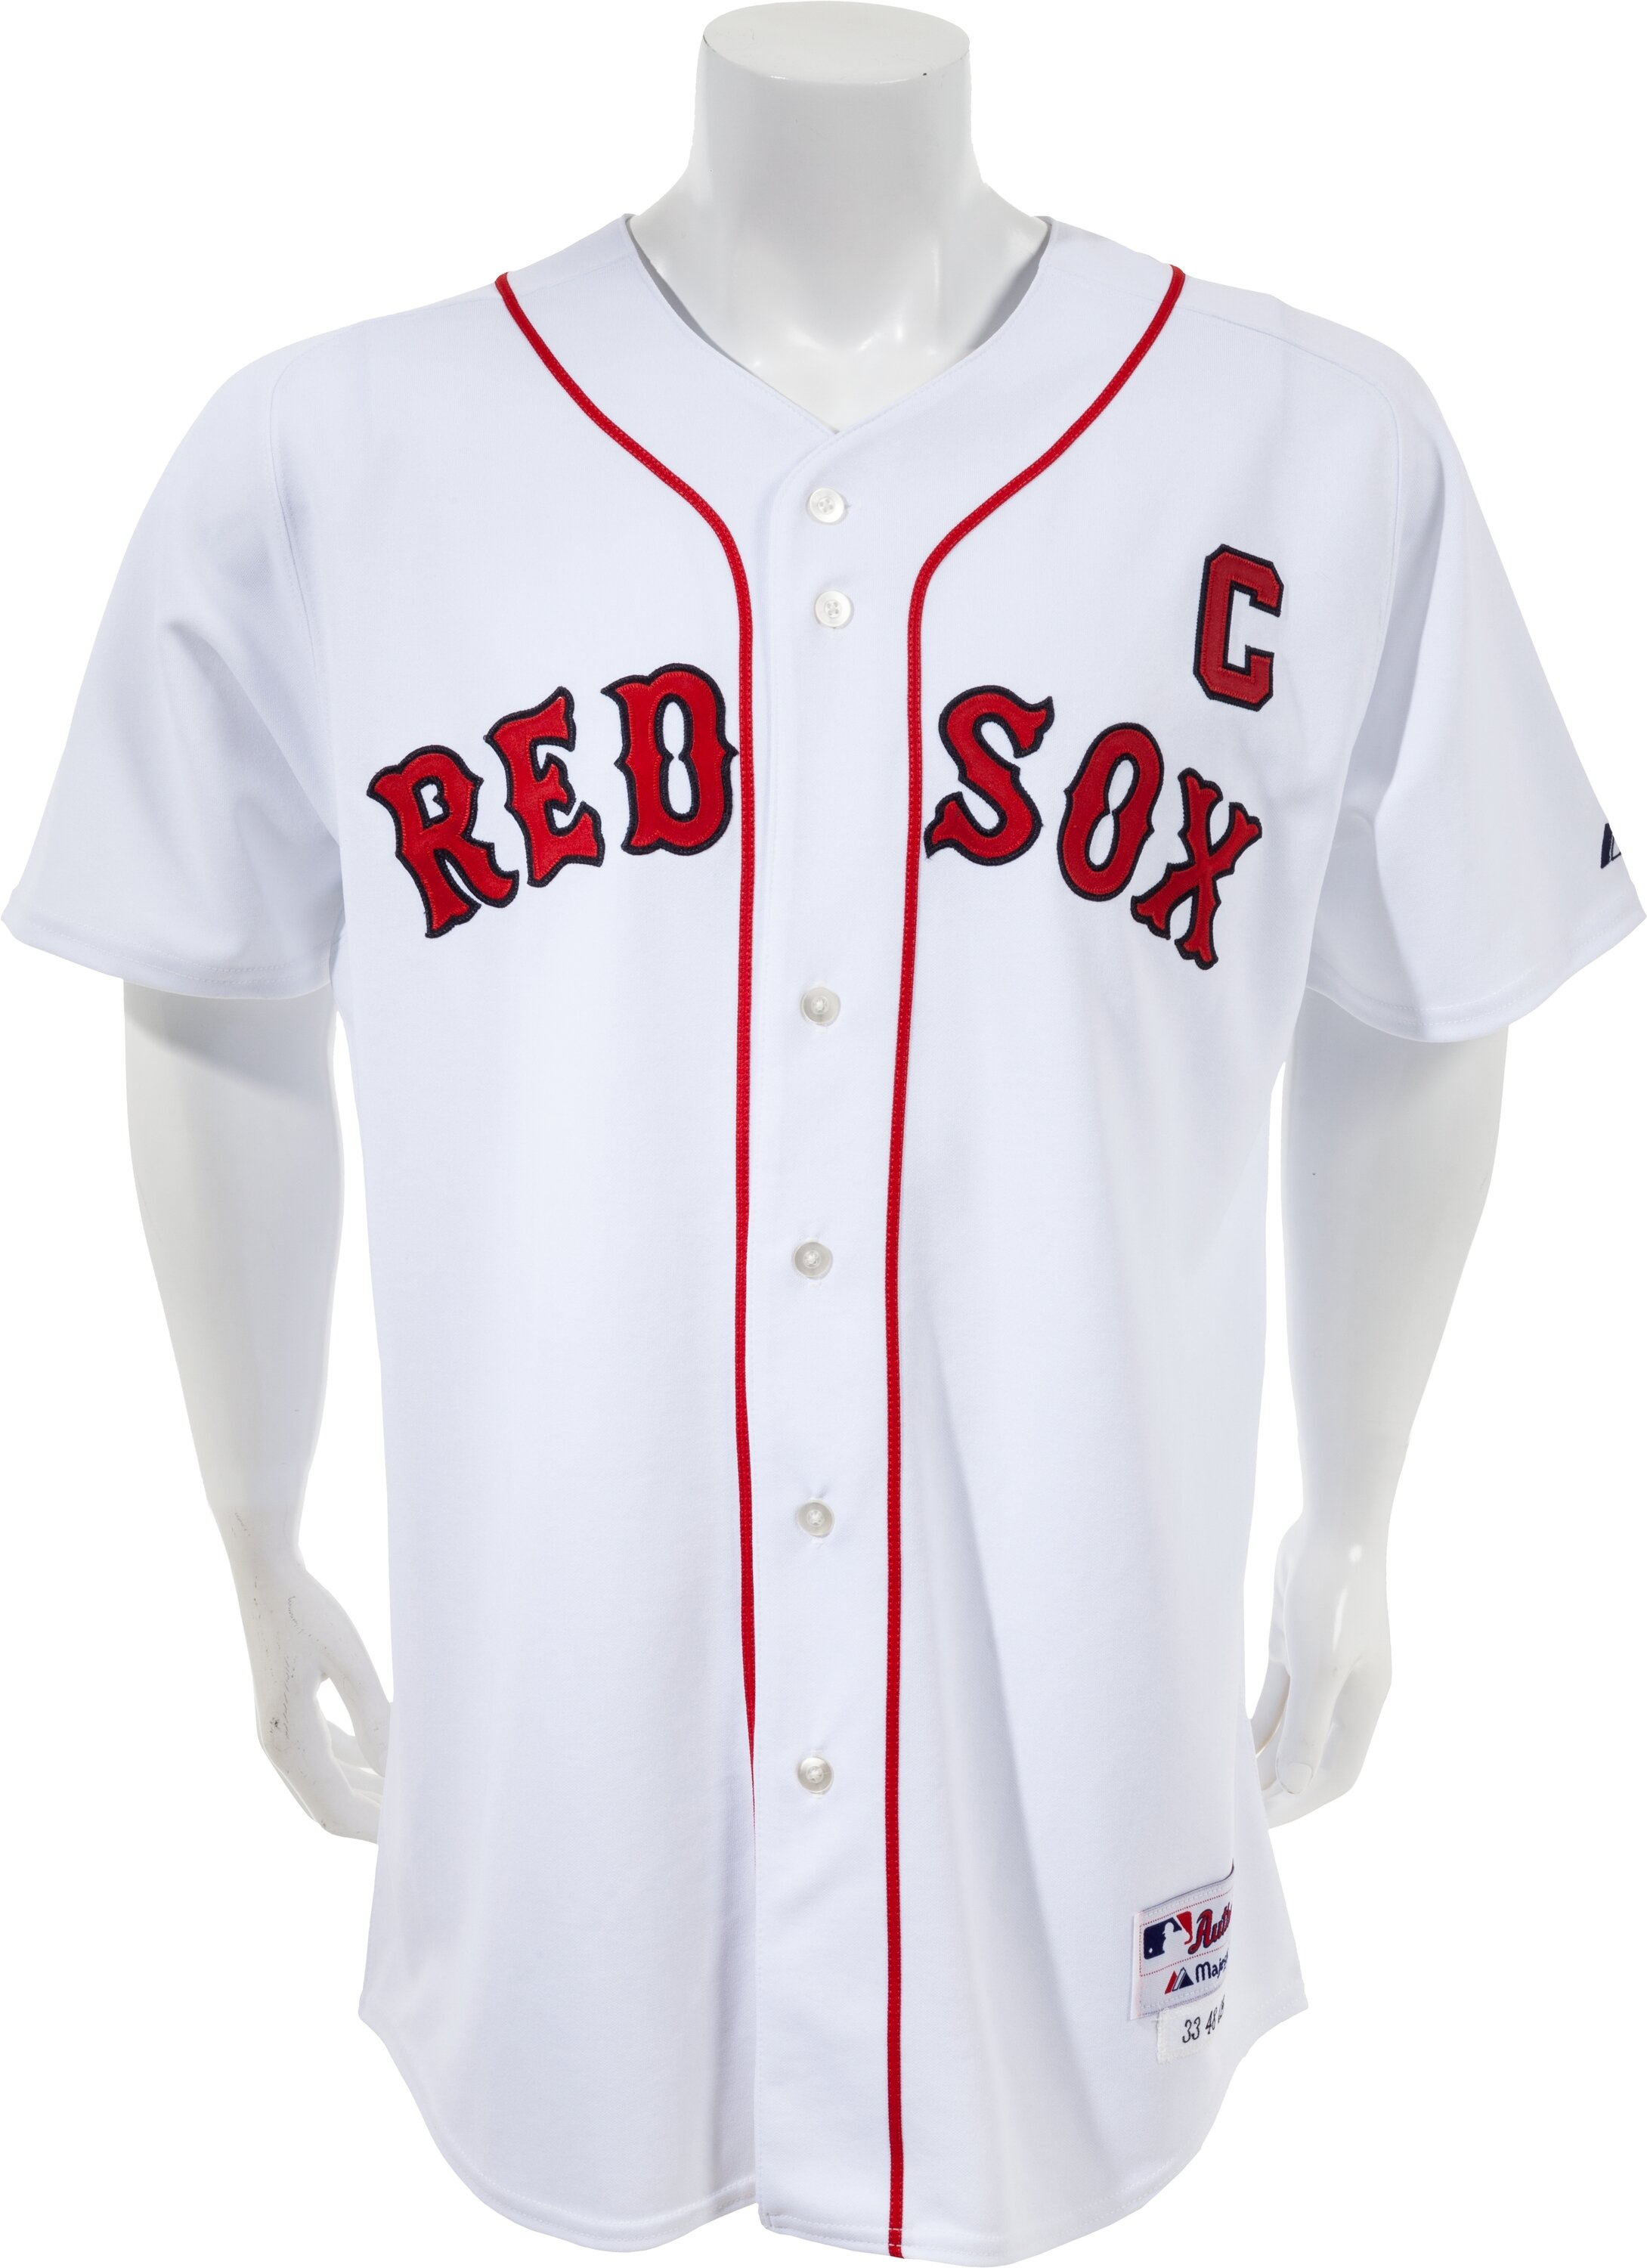 Boston Red Sox 1975 Throwback Complete Game-Used Uniform Set